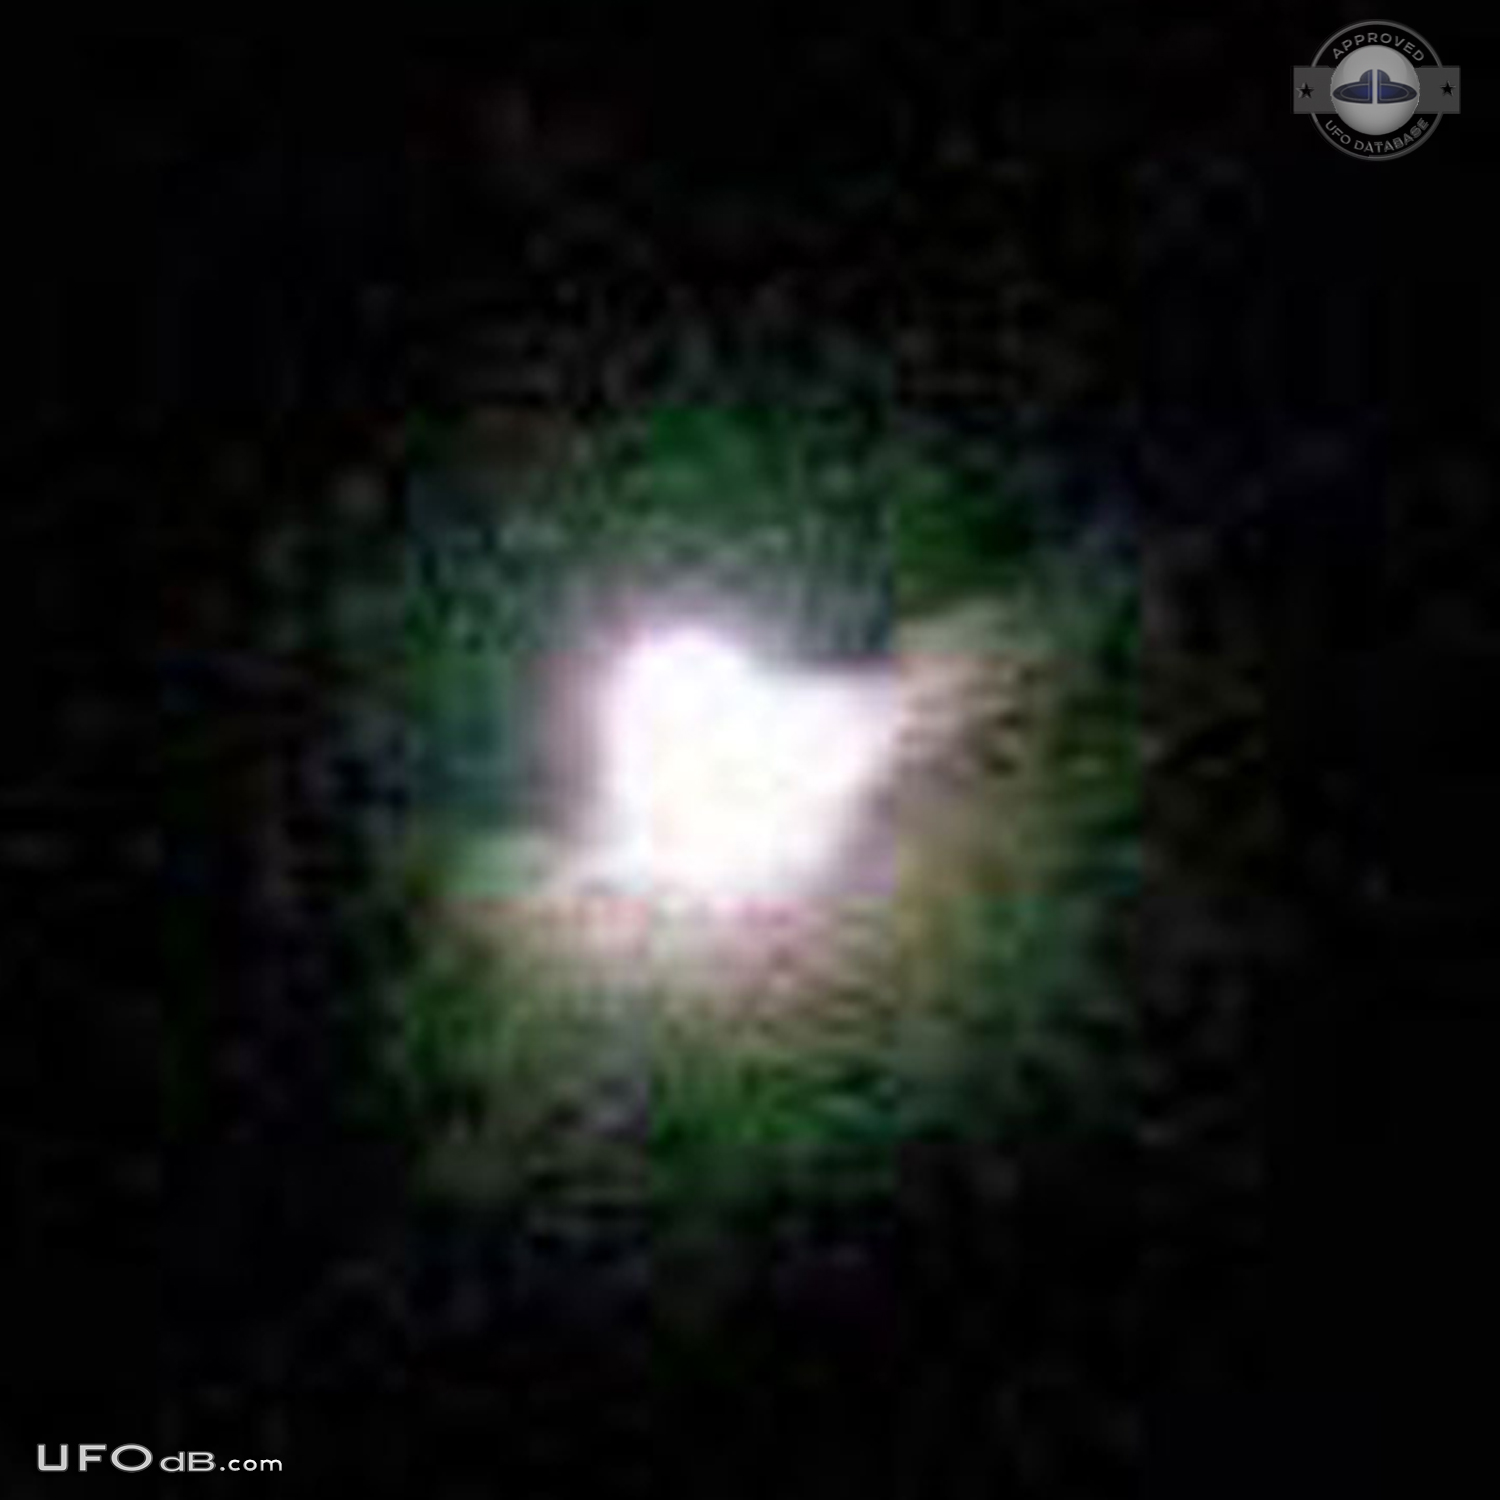 Bright UFO in the night sky of Herning Denmark caught on picture 2007 UFO Picture #445-3